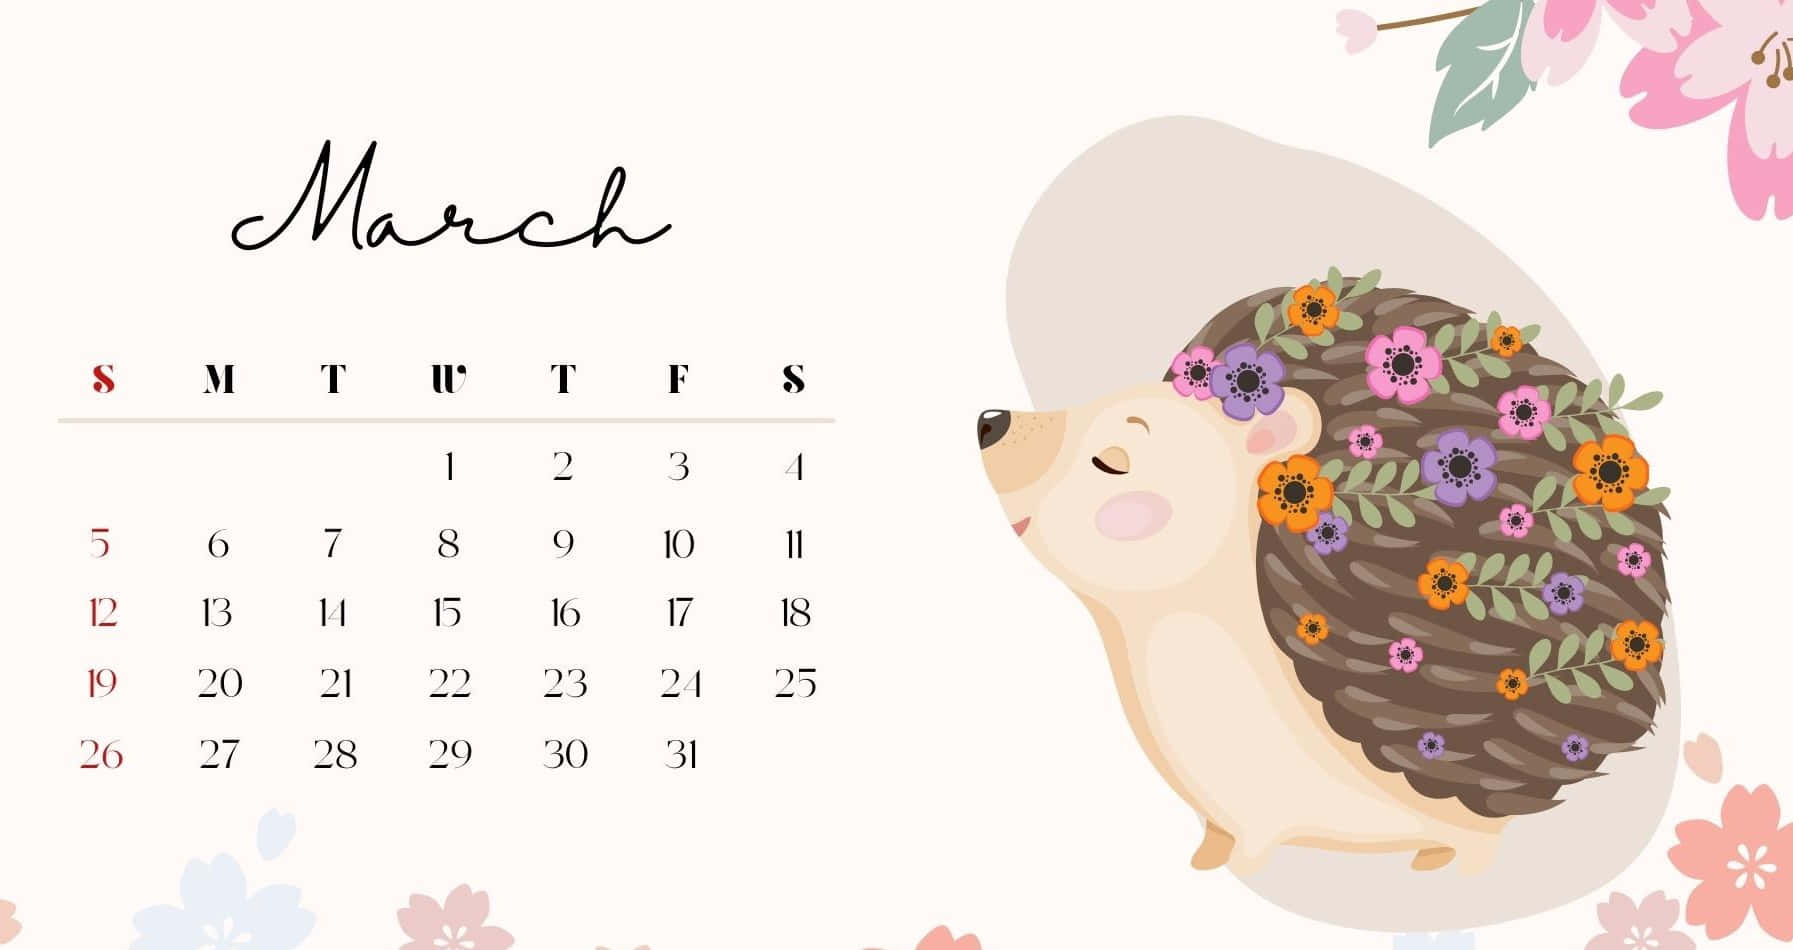 Make March a month full of exciting experiences